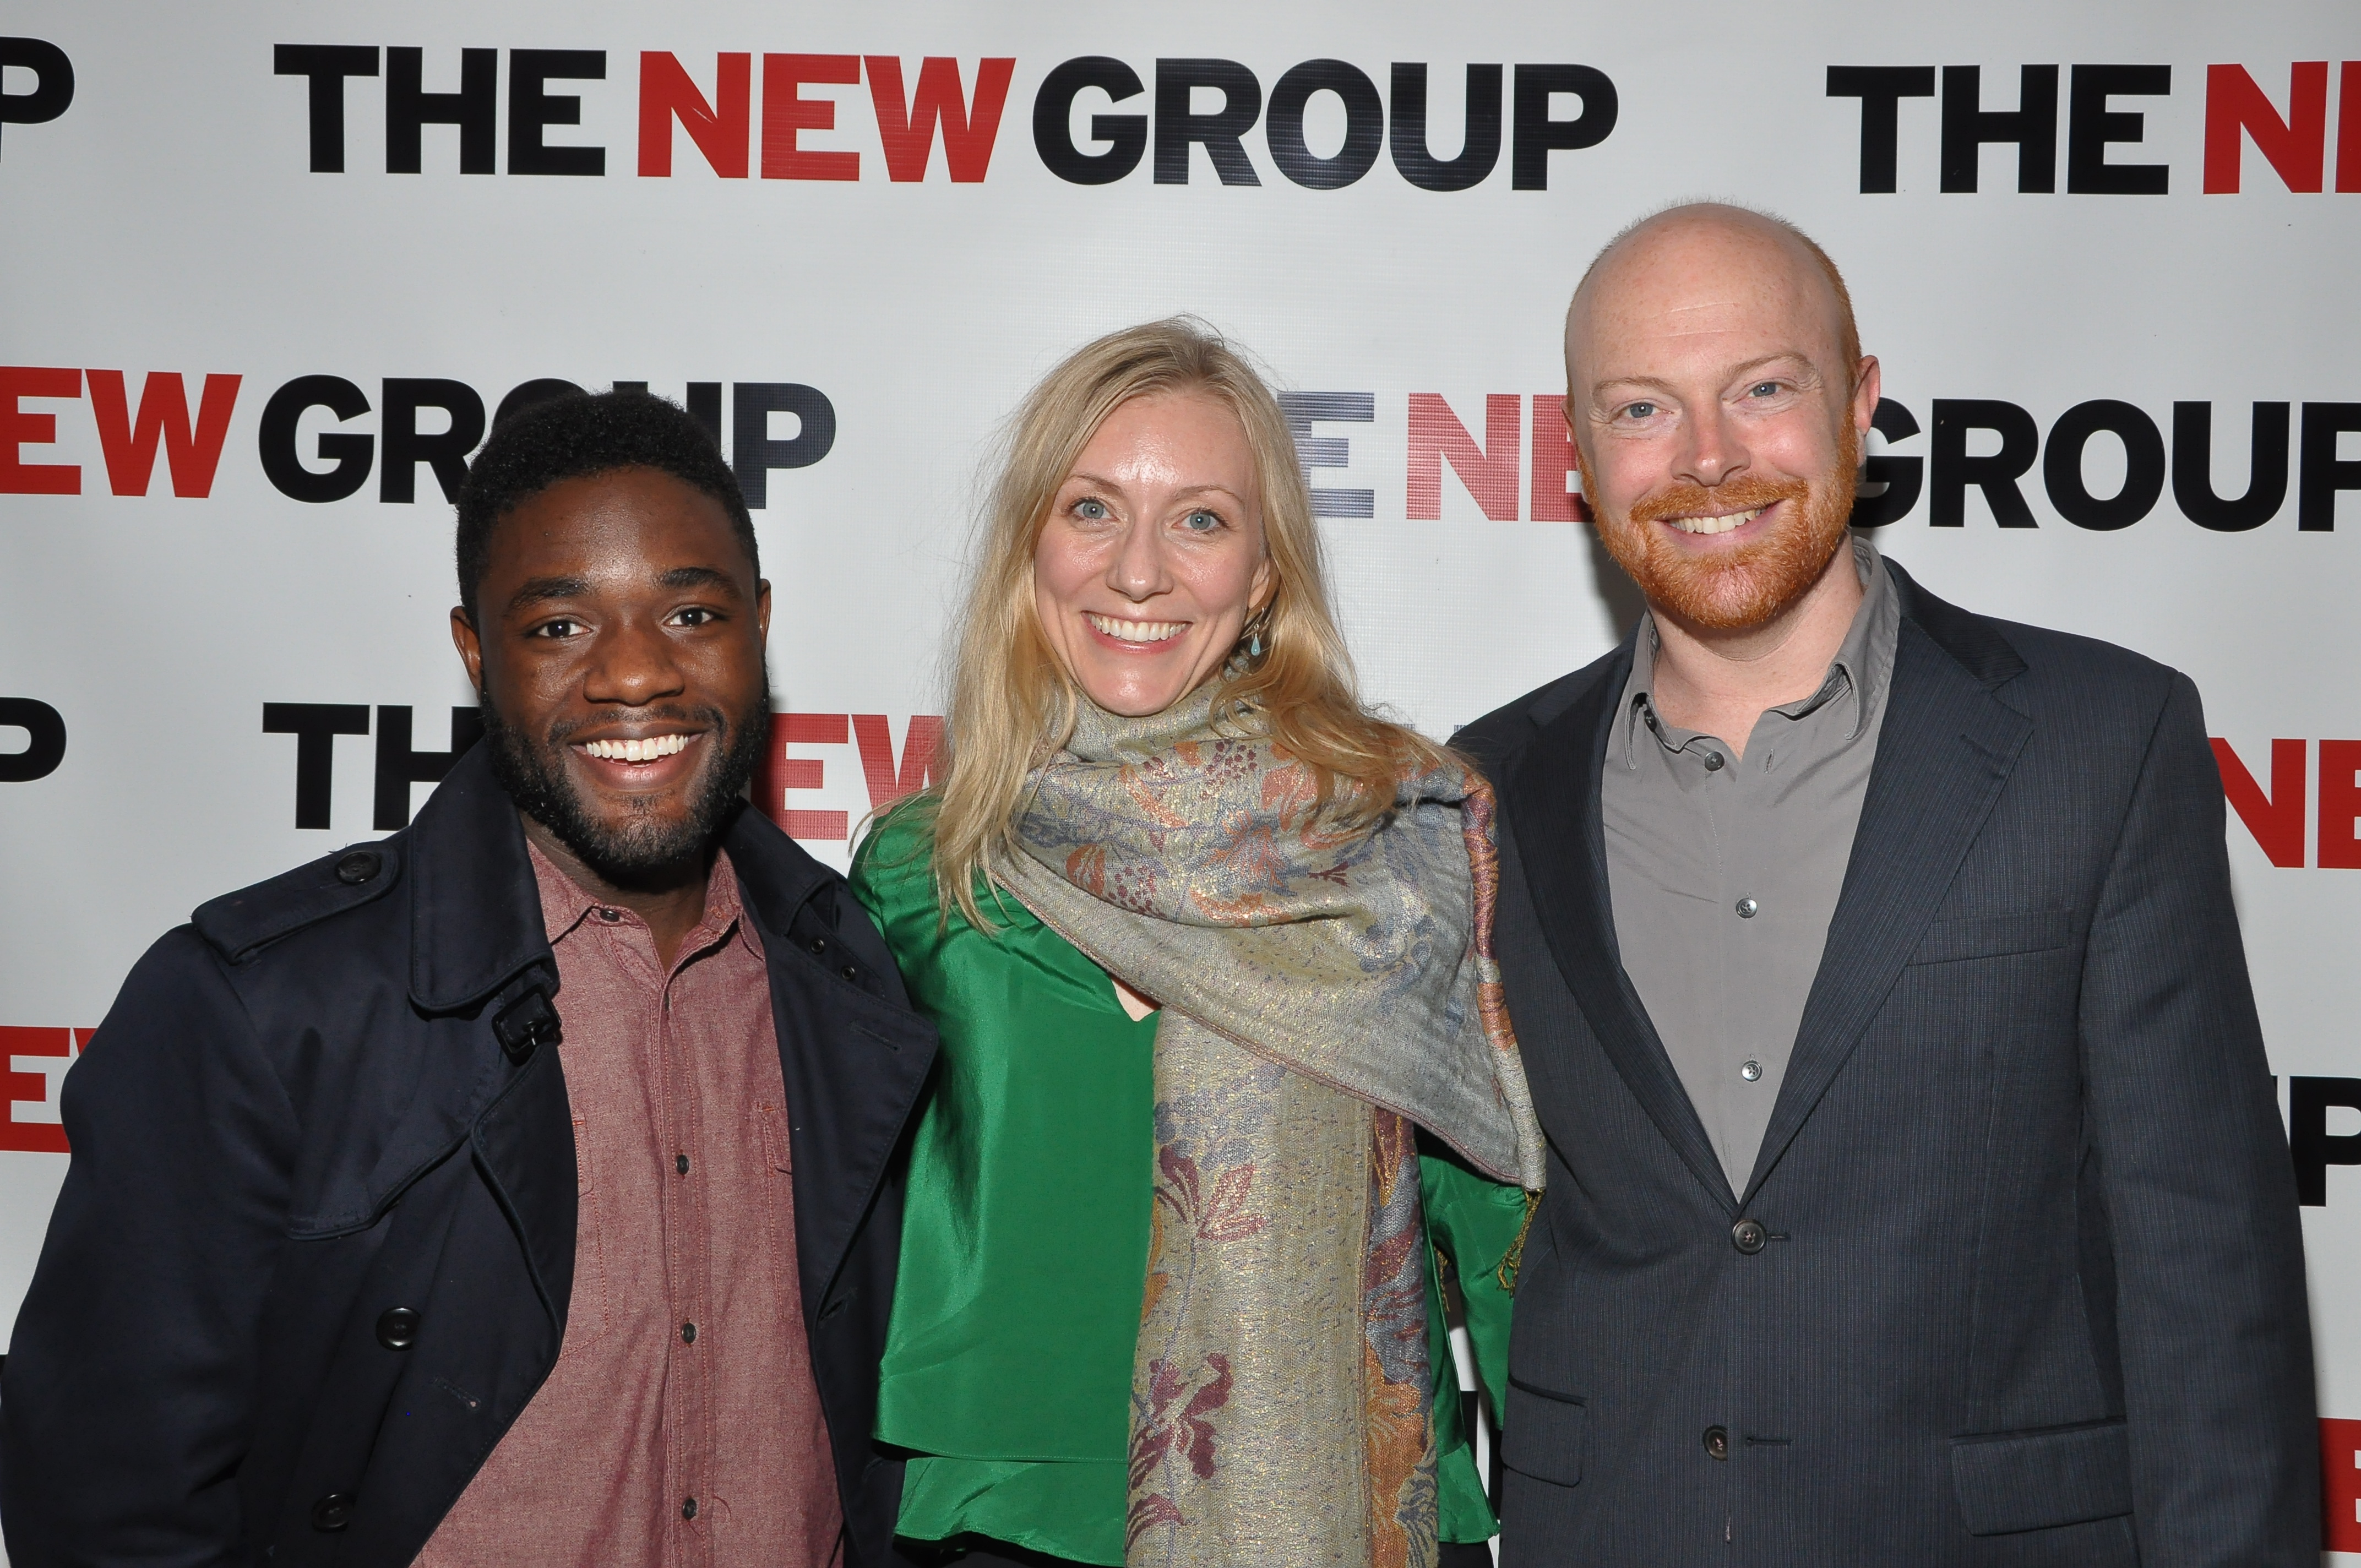 New Group alums Vladimir Versailles (Burning), Tina Benko (Marie and Bruce) and Jeff Biehl (Burning) show their love for the off-Broadway theater company THE NEW GROUP.